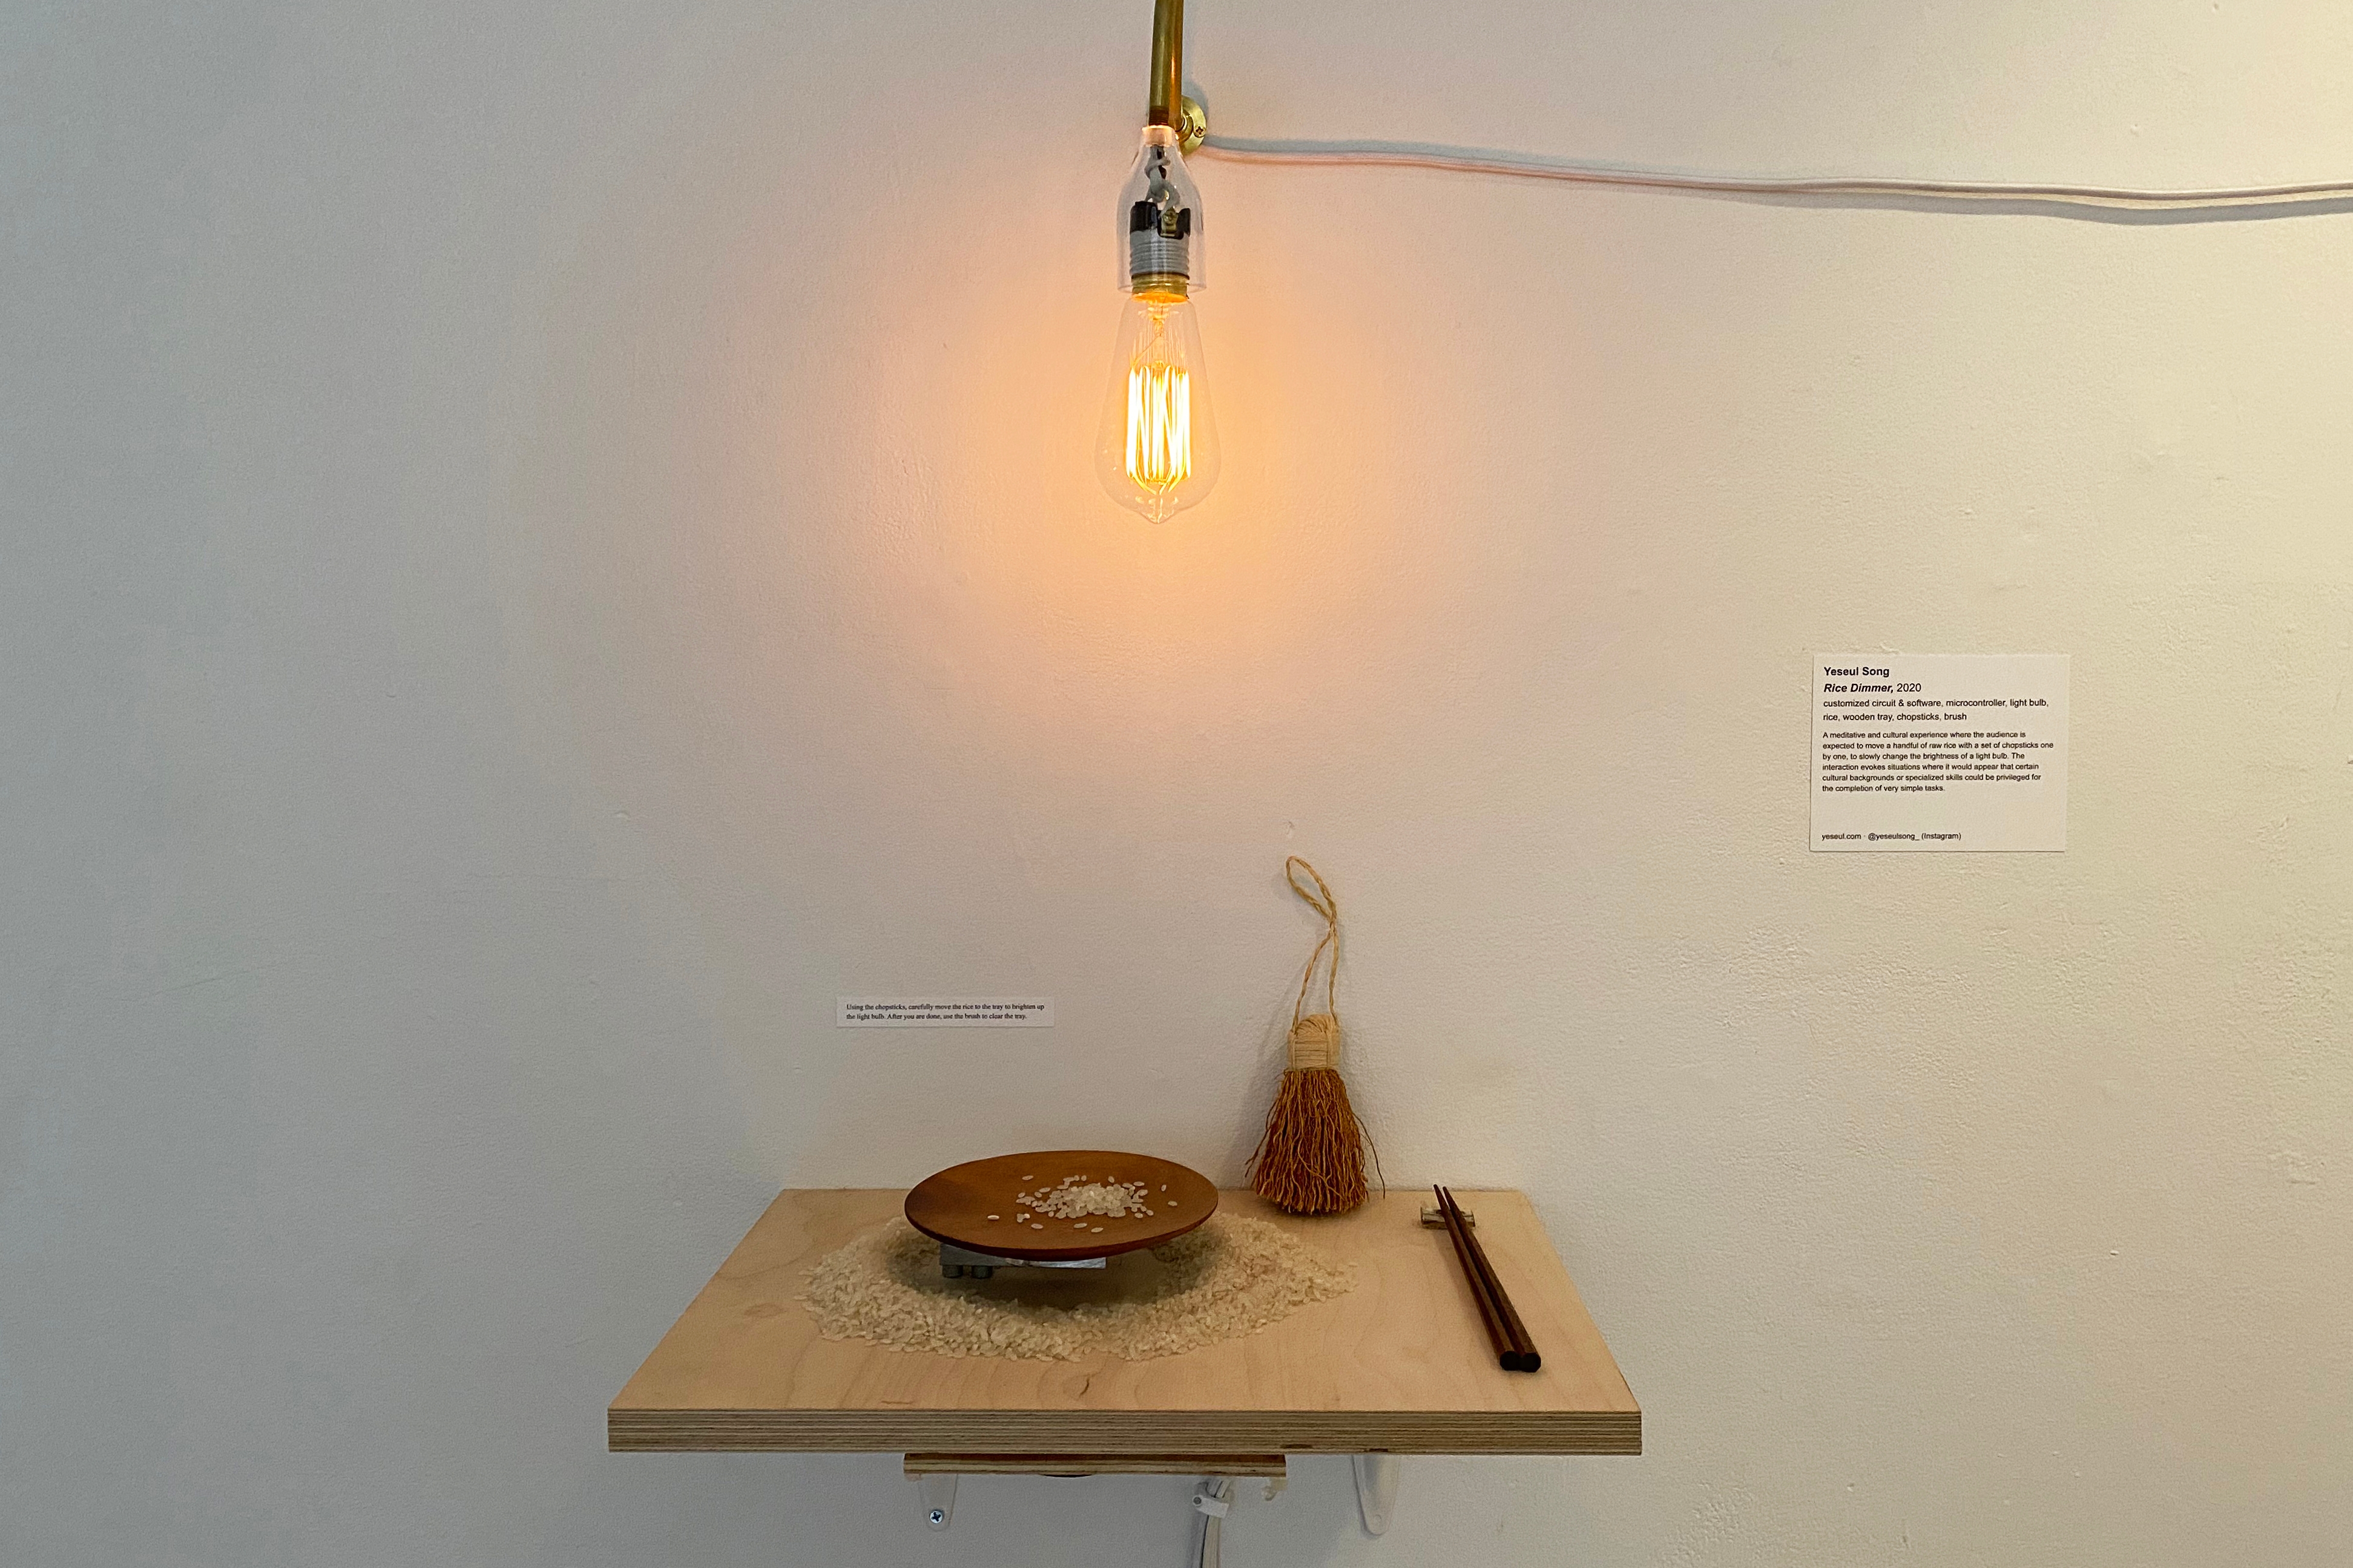 Grains of rice on and surrounding a plate sitting on a shelf underneath a light bulb